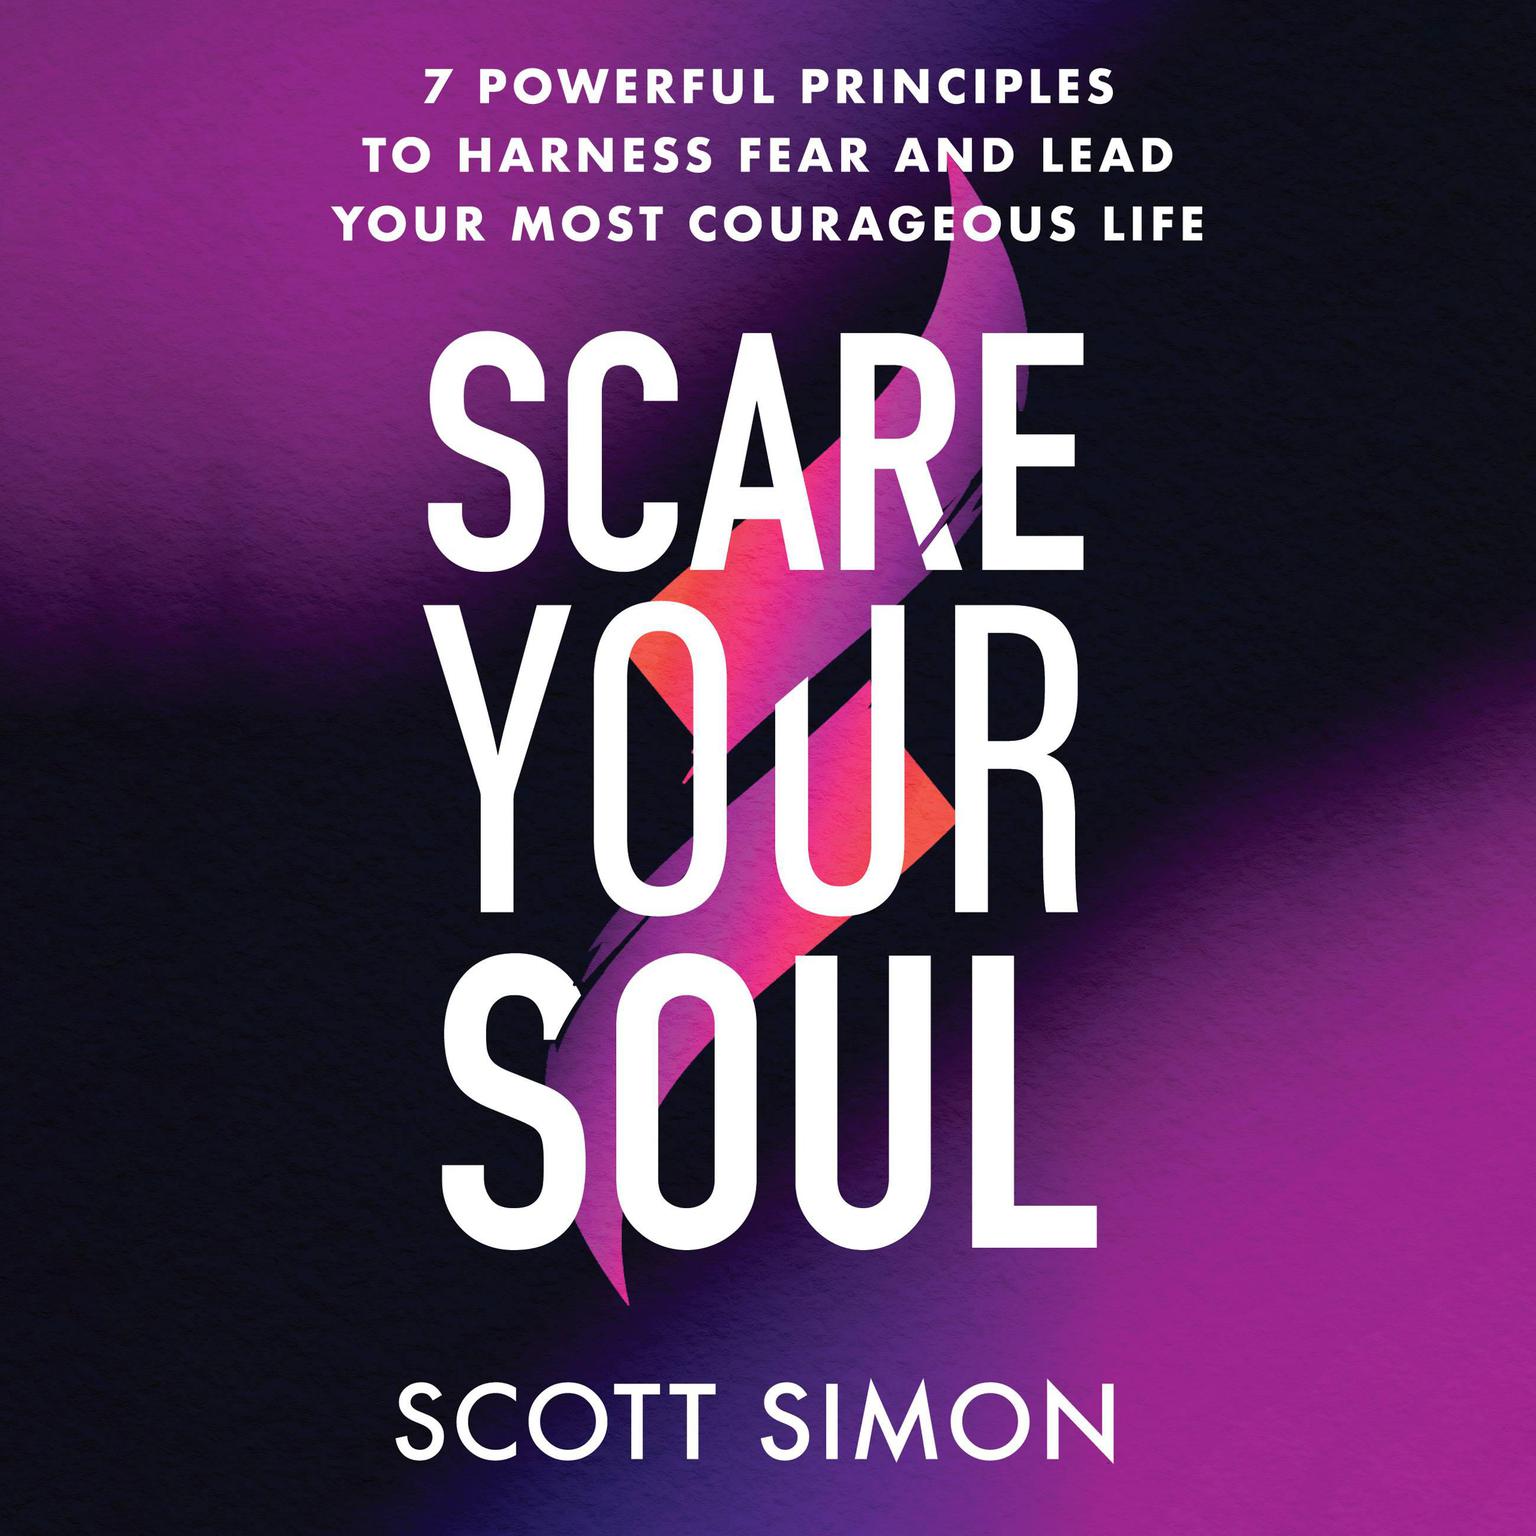 Scare Your Soul: 7 Powerful Principles to Harness Fear and Lead Your Most Courageous Life Audiobook, by Scott Simon